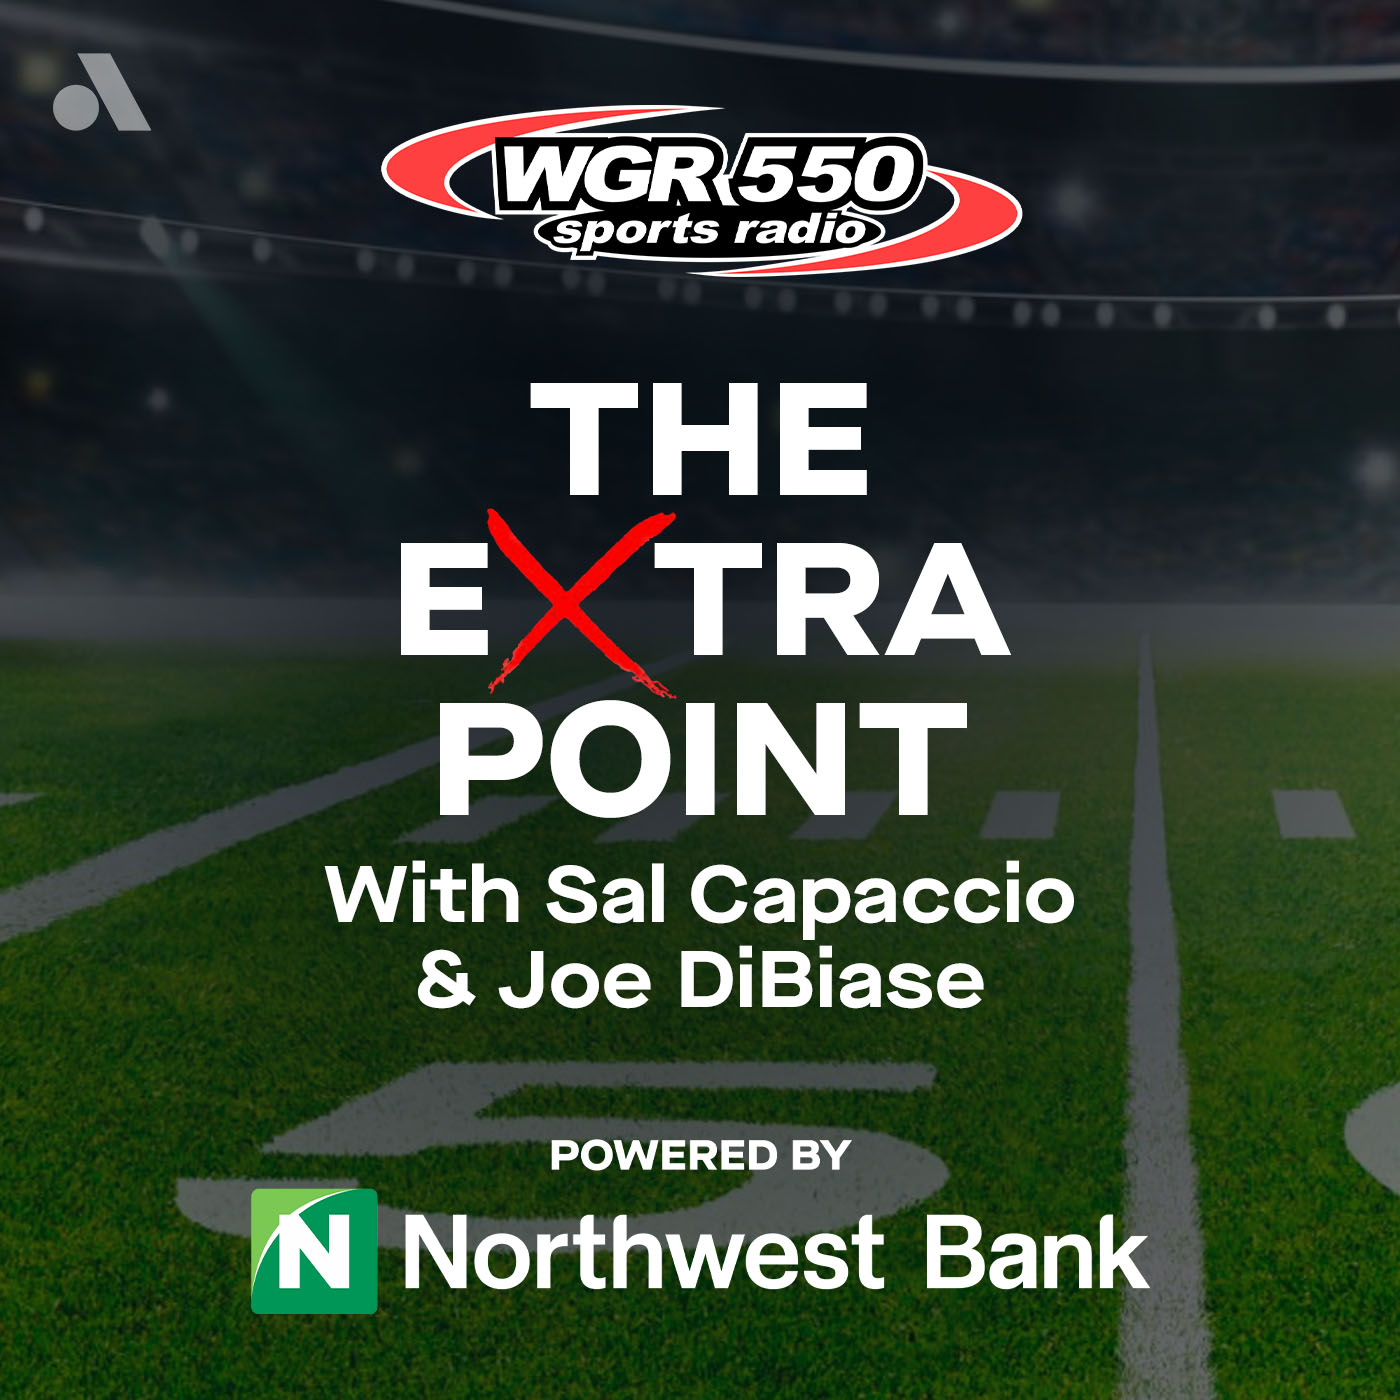 11-26 - Hour 1 of The Extra Point Show with Sneaky Joe DiBiase